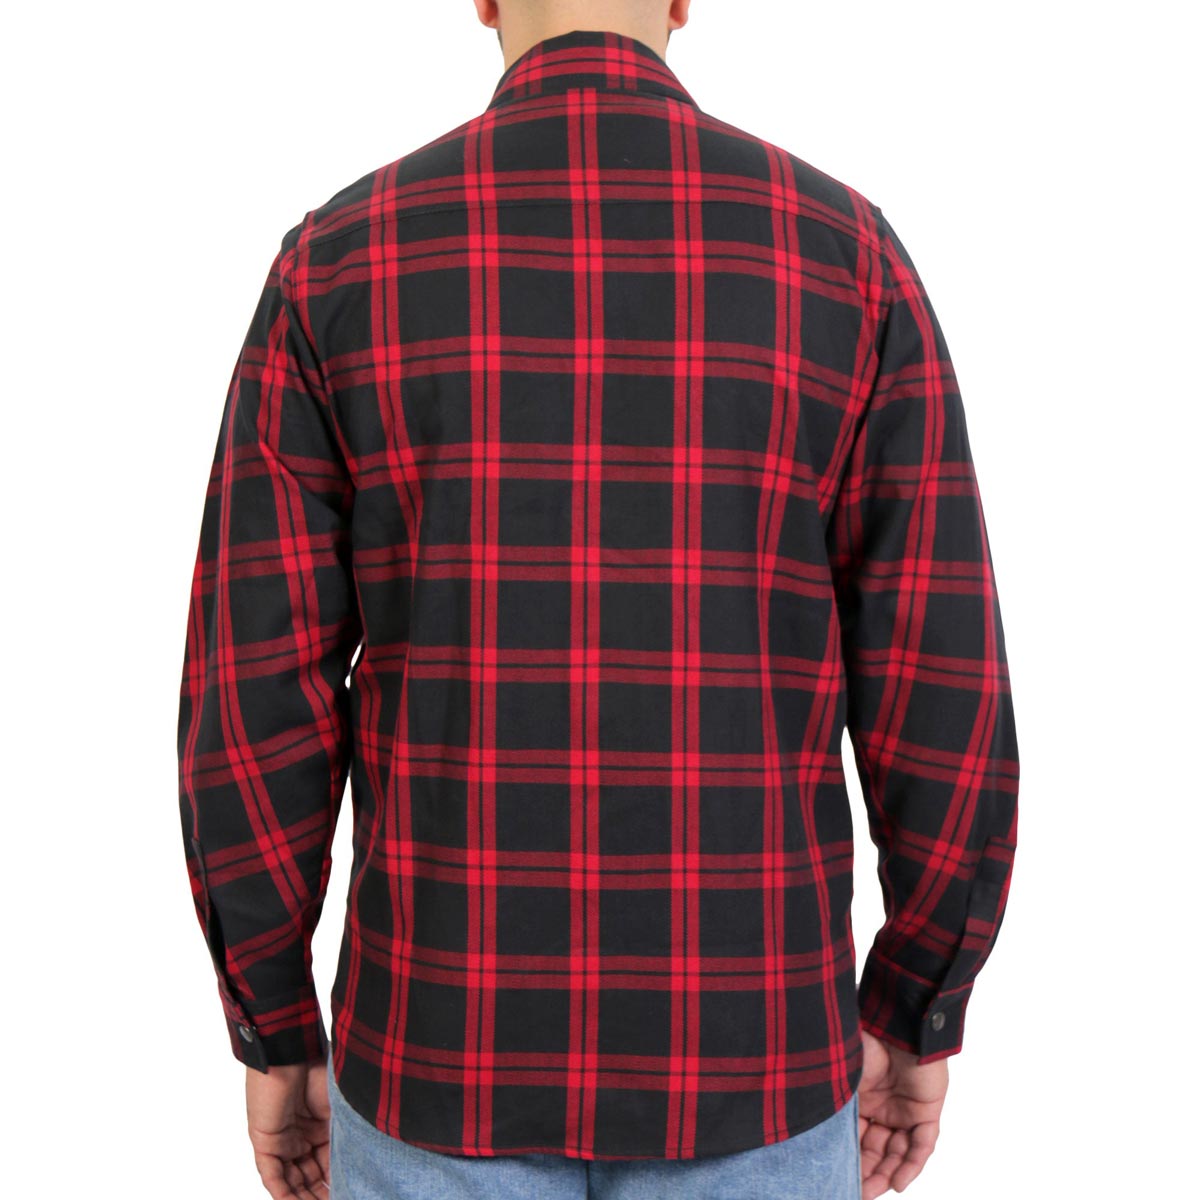 Hot Leathers FLM3001 Men's 'Red and Black' Long Sleeve Flannel Shirt